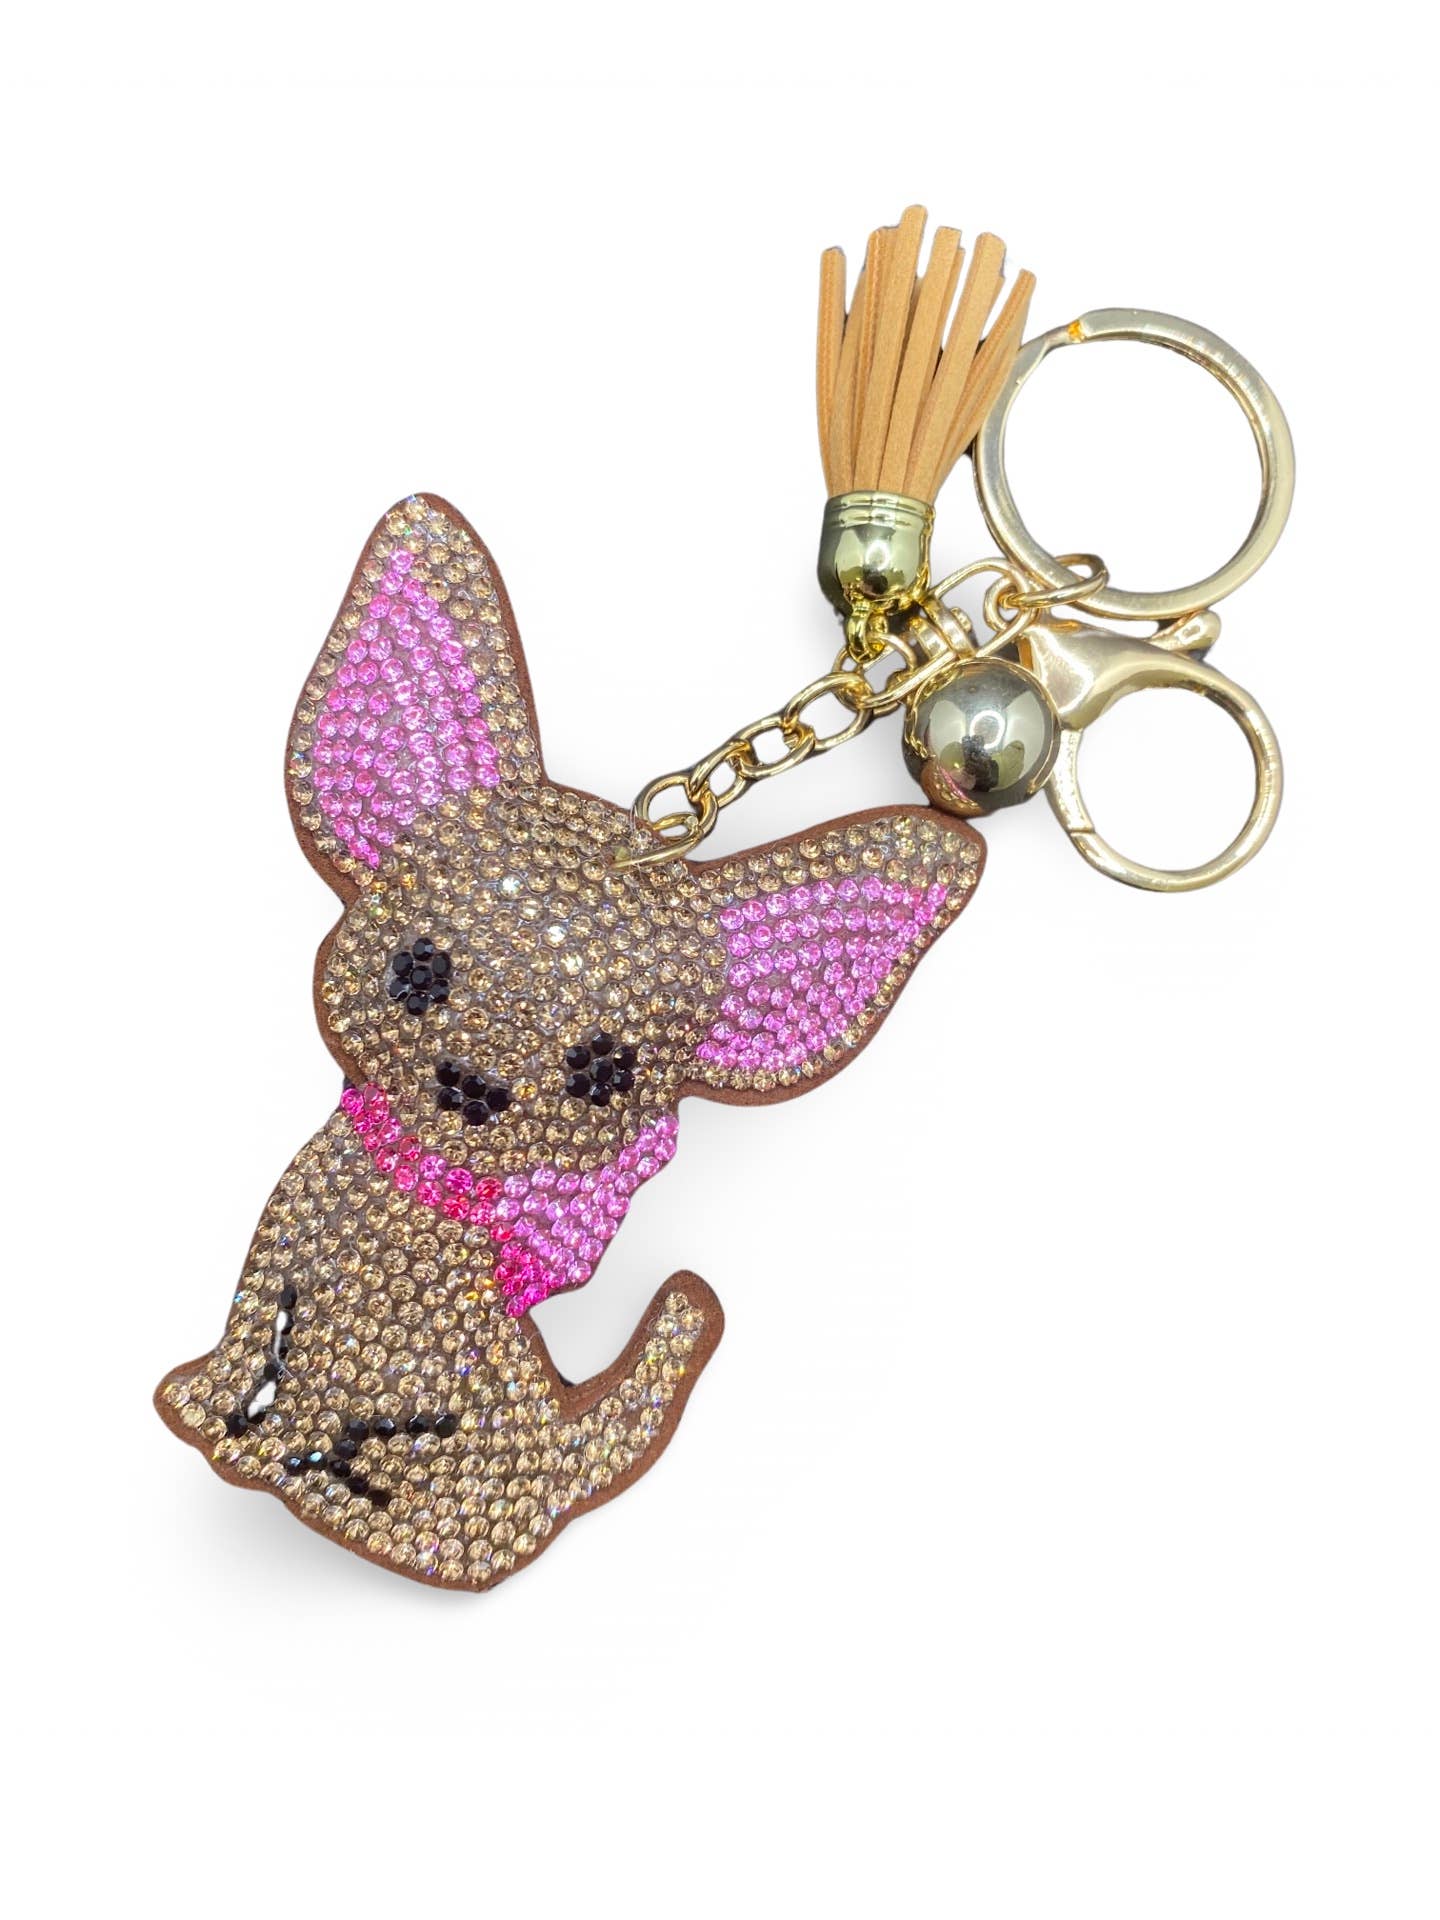 Blingy Chihuahua Stone-Studded Keychains